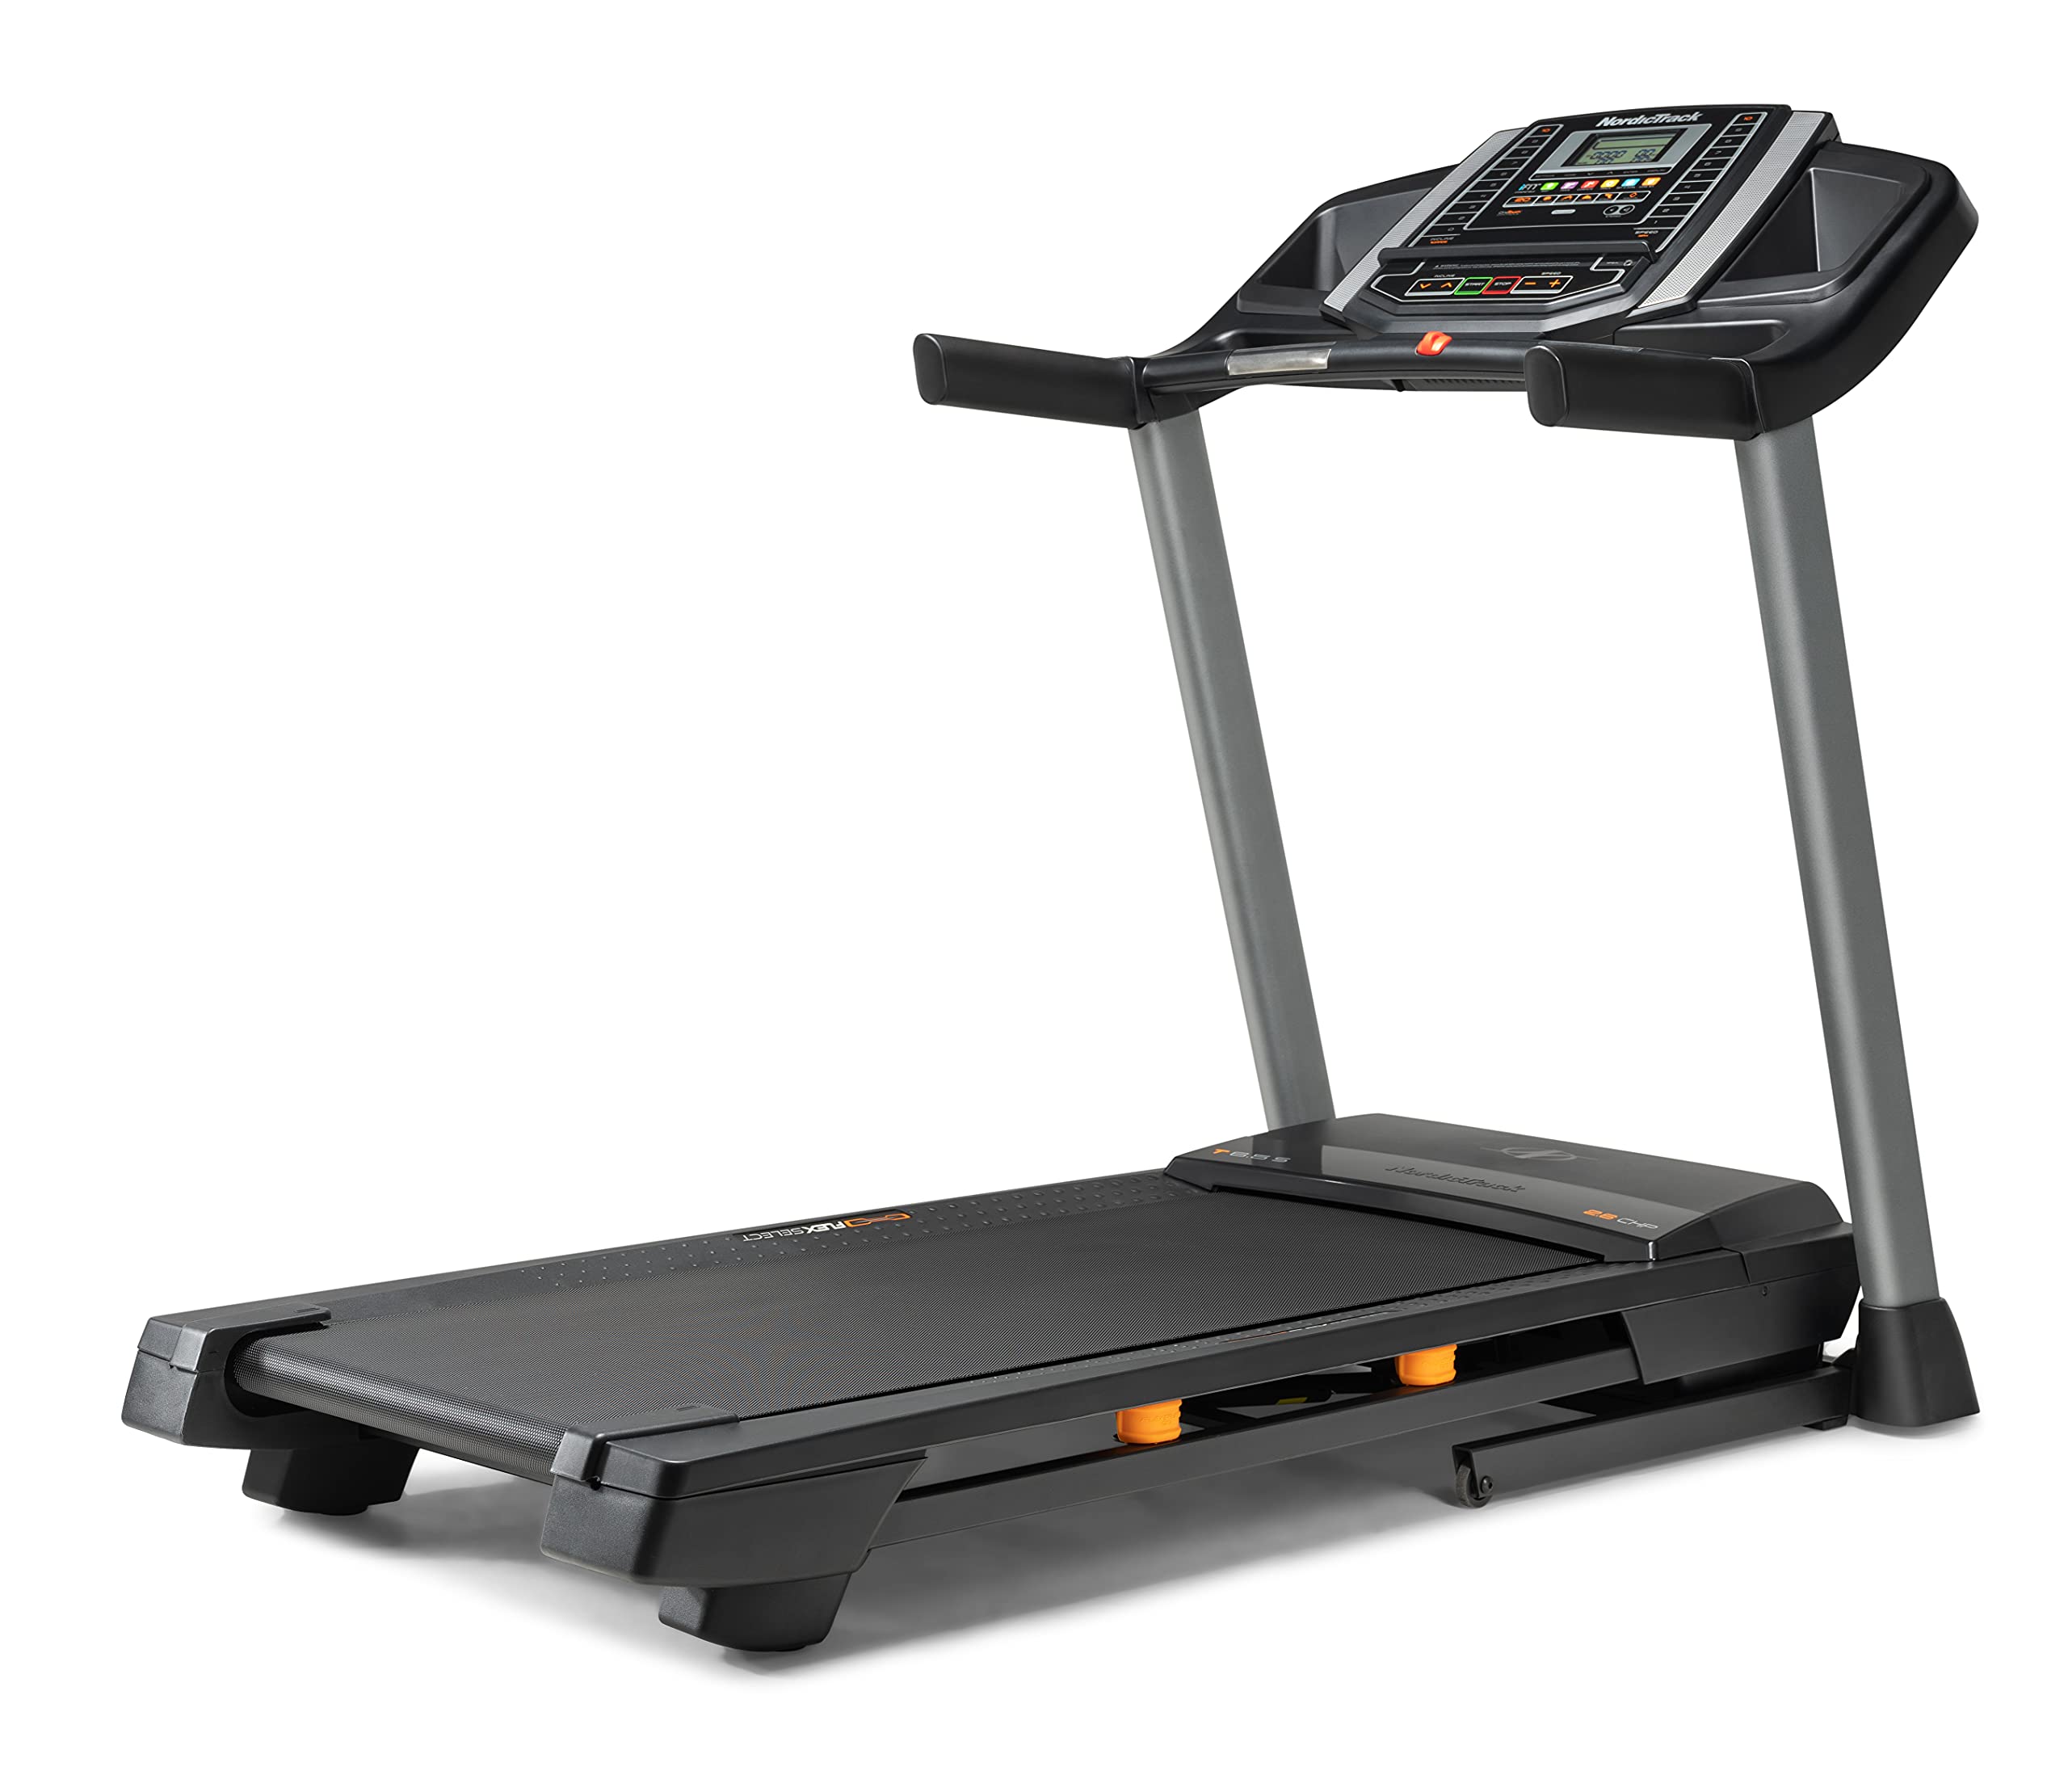 NordicTrack T Series 6.5S Treadmill + 1 Month iFit Subscription $568.28 + Free Shipping